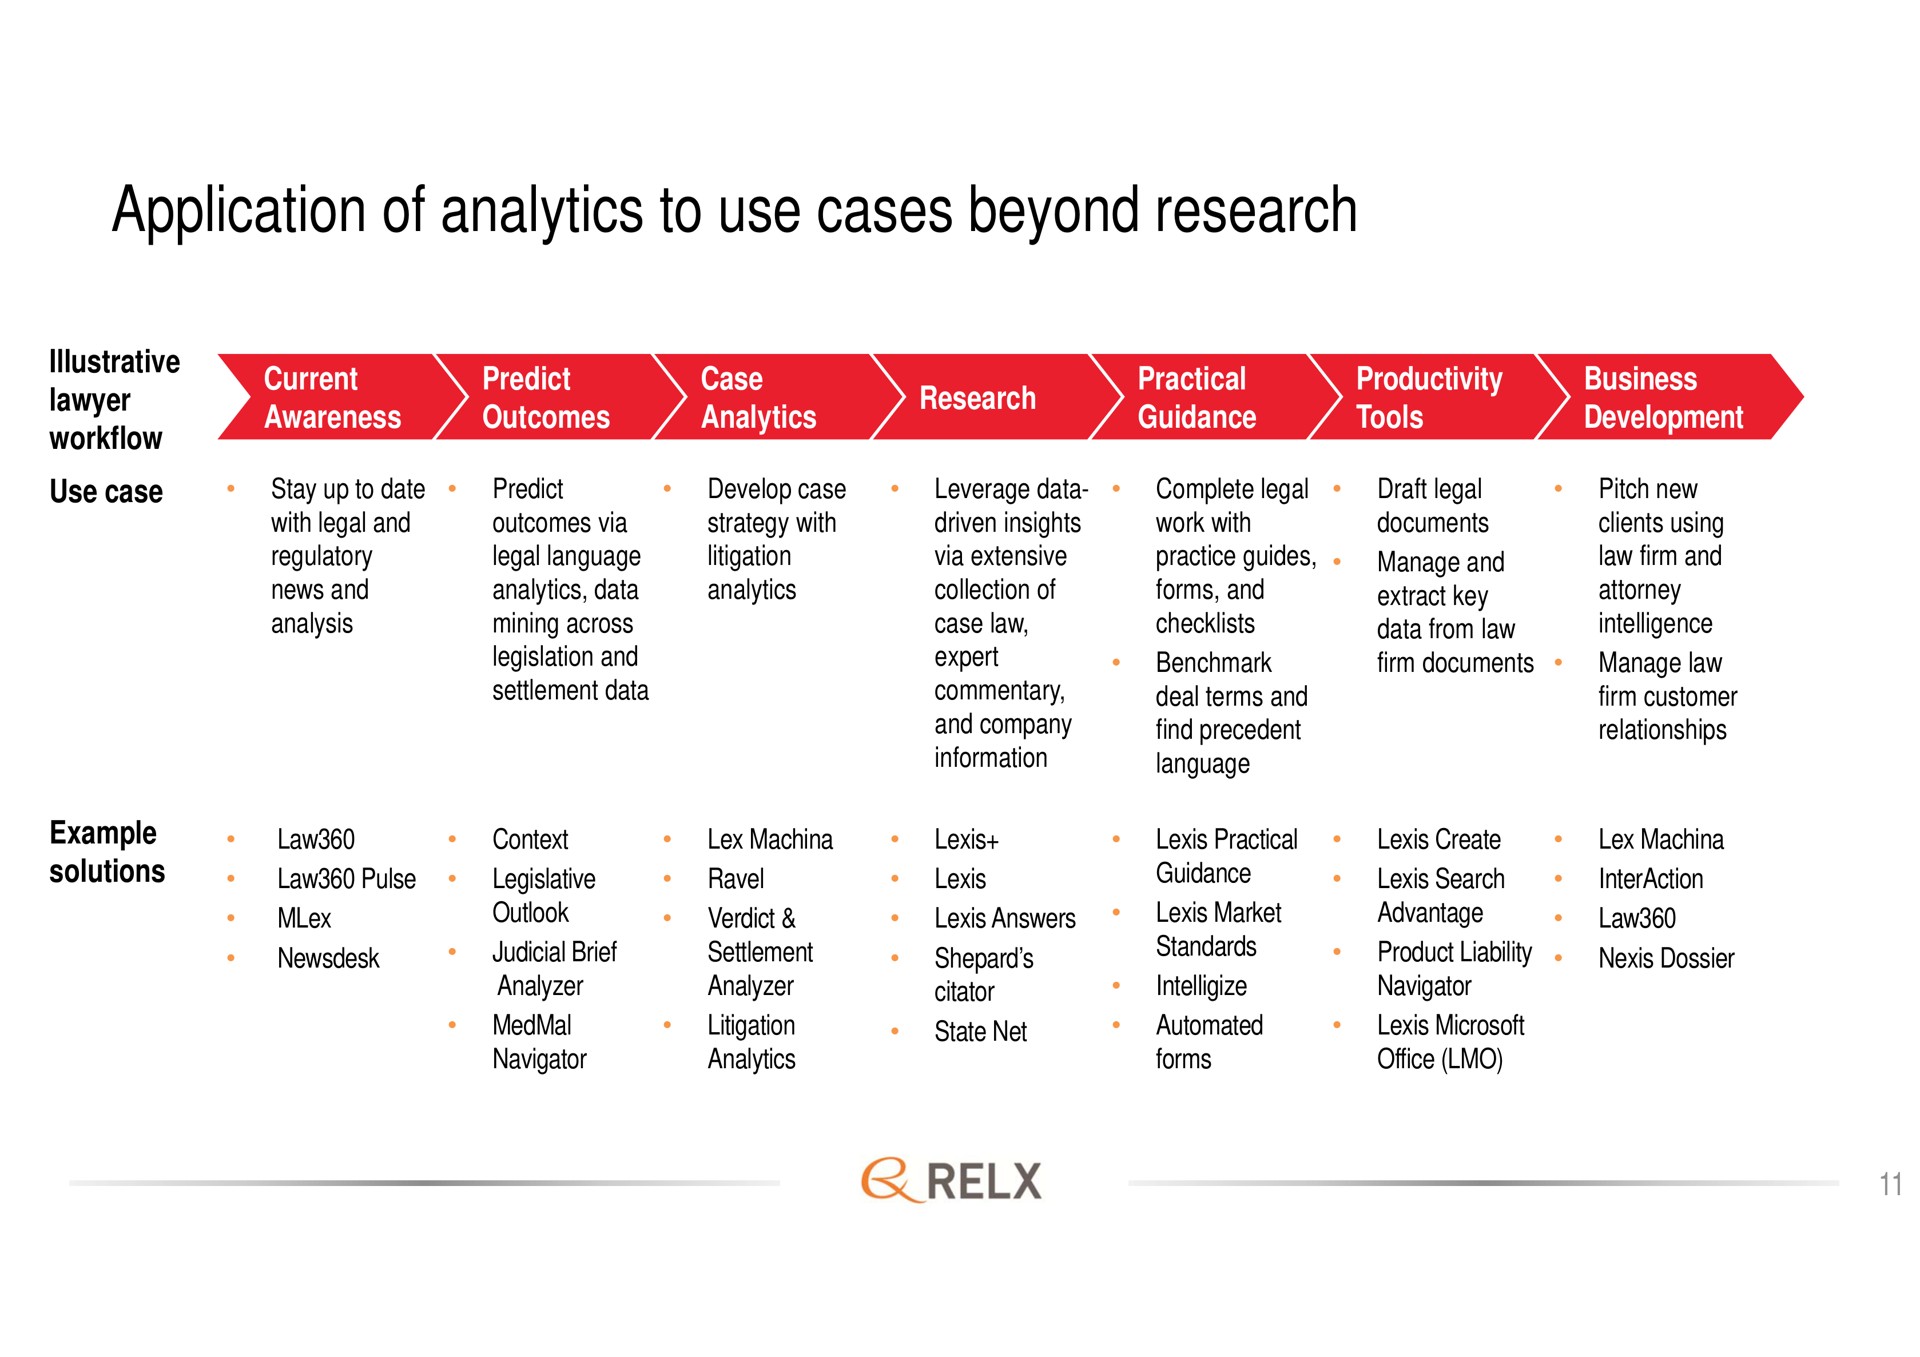 application of analytics to use cases beyond research | RELX